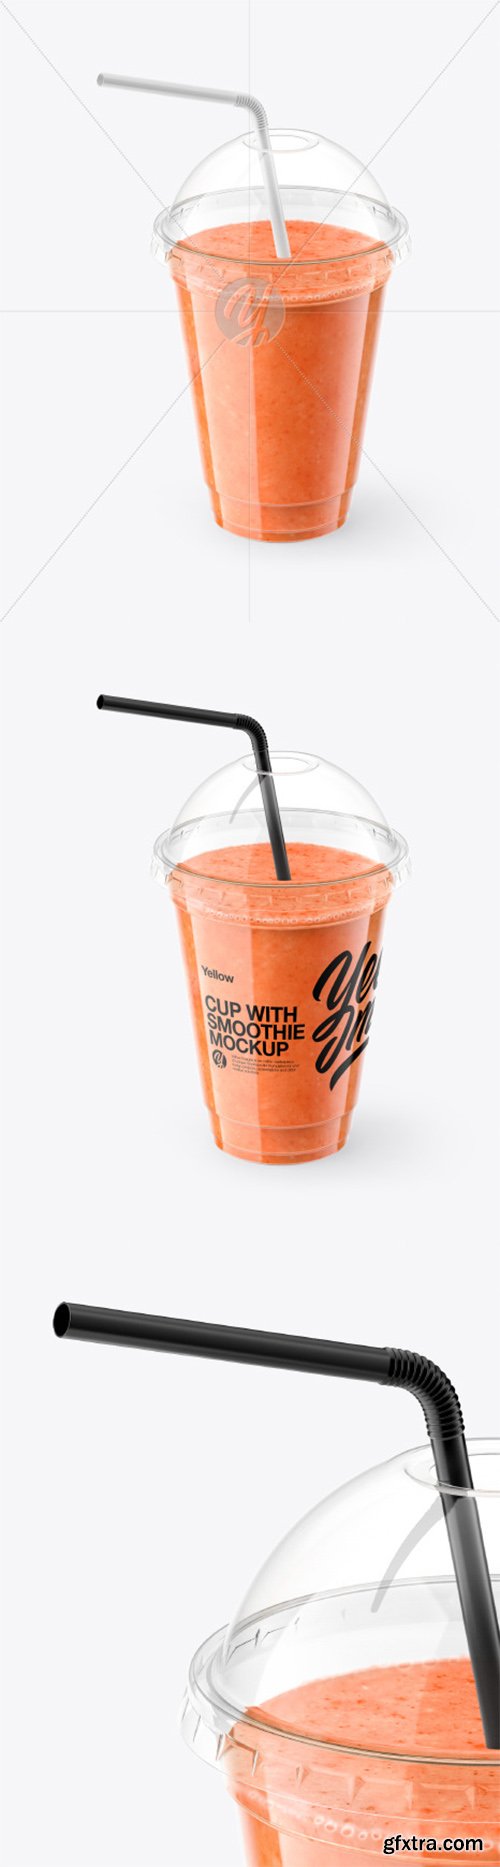 Watermelon Smoothie Cup with Straw Mockup 61668